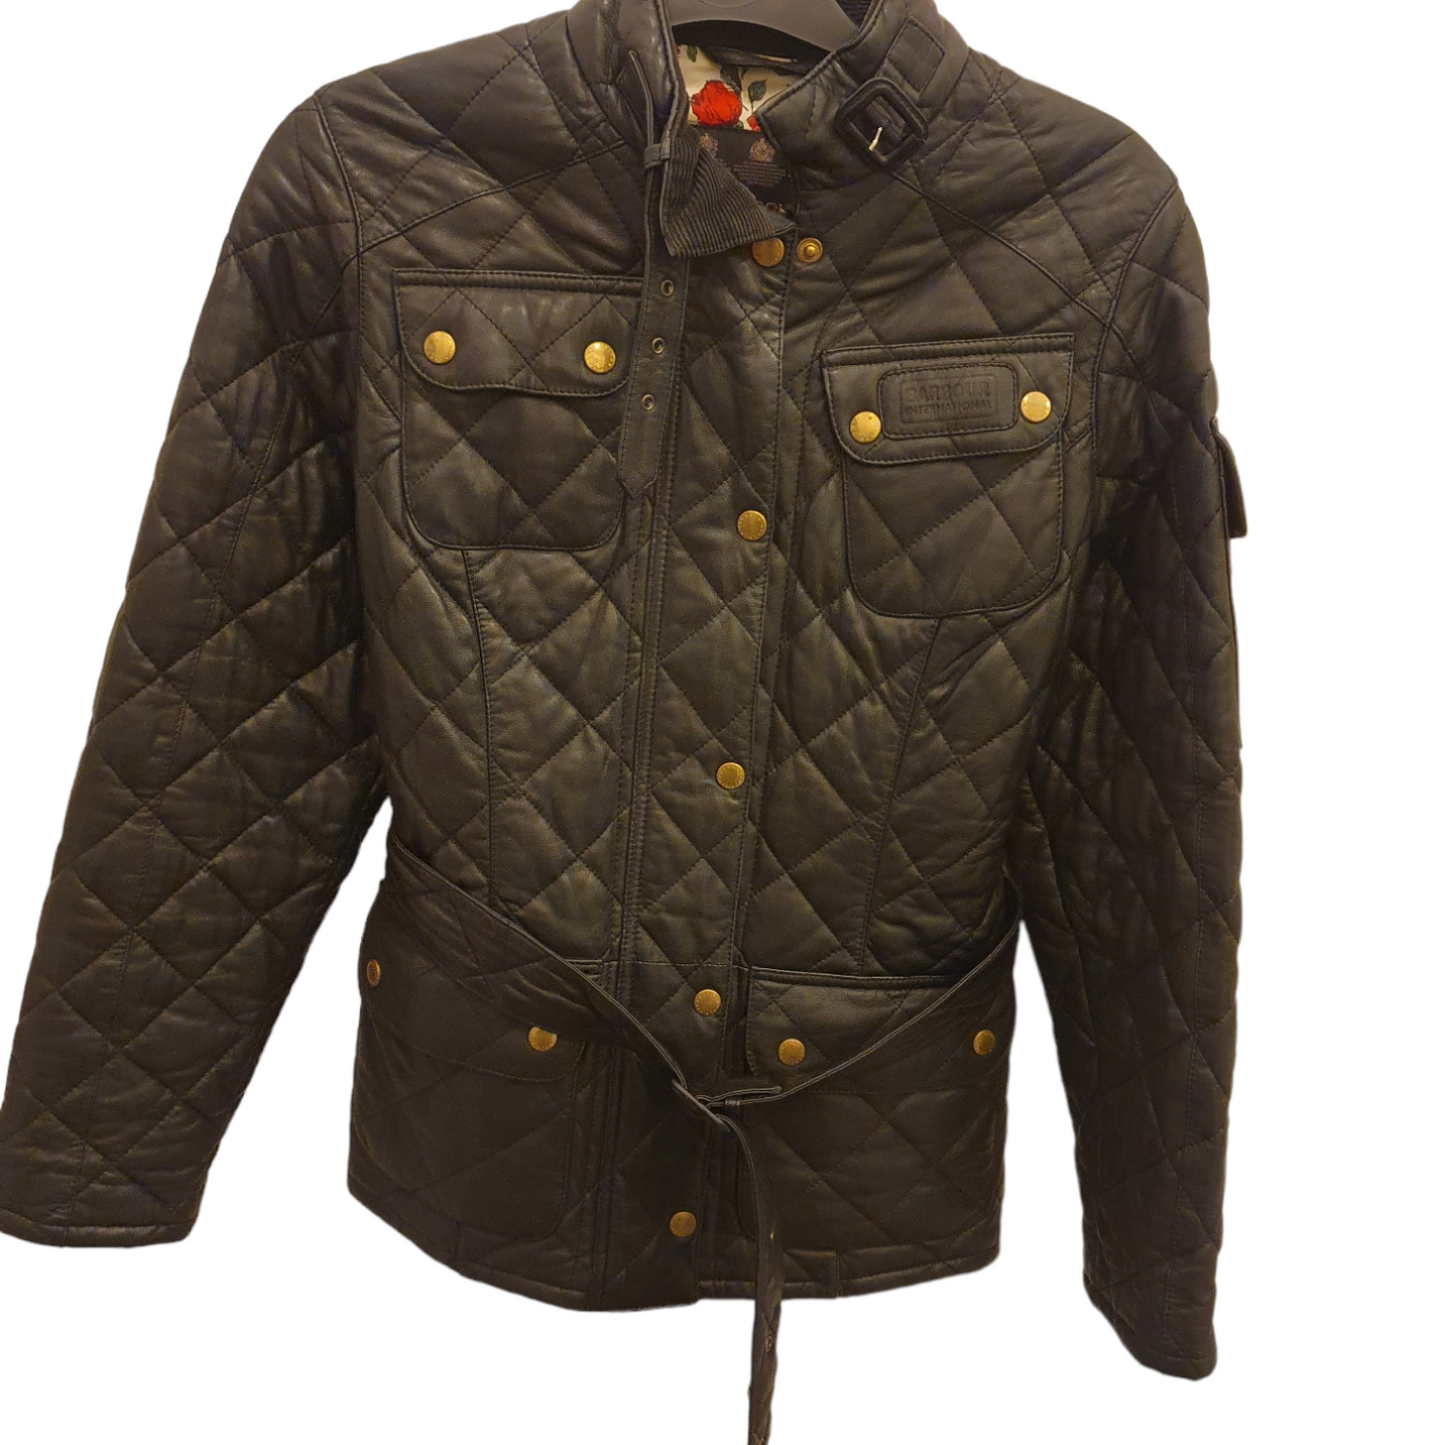 Barbour 'limited edition' black leather quilted jacket, with Liberty London lining, size 8